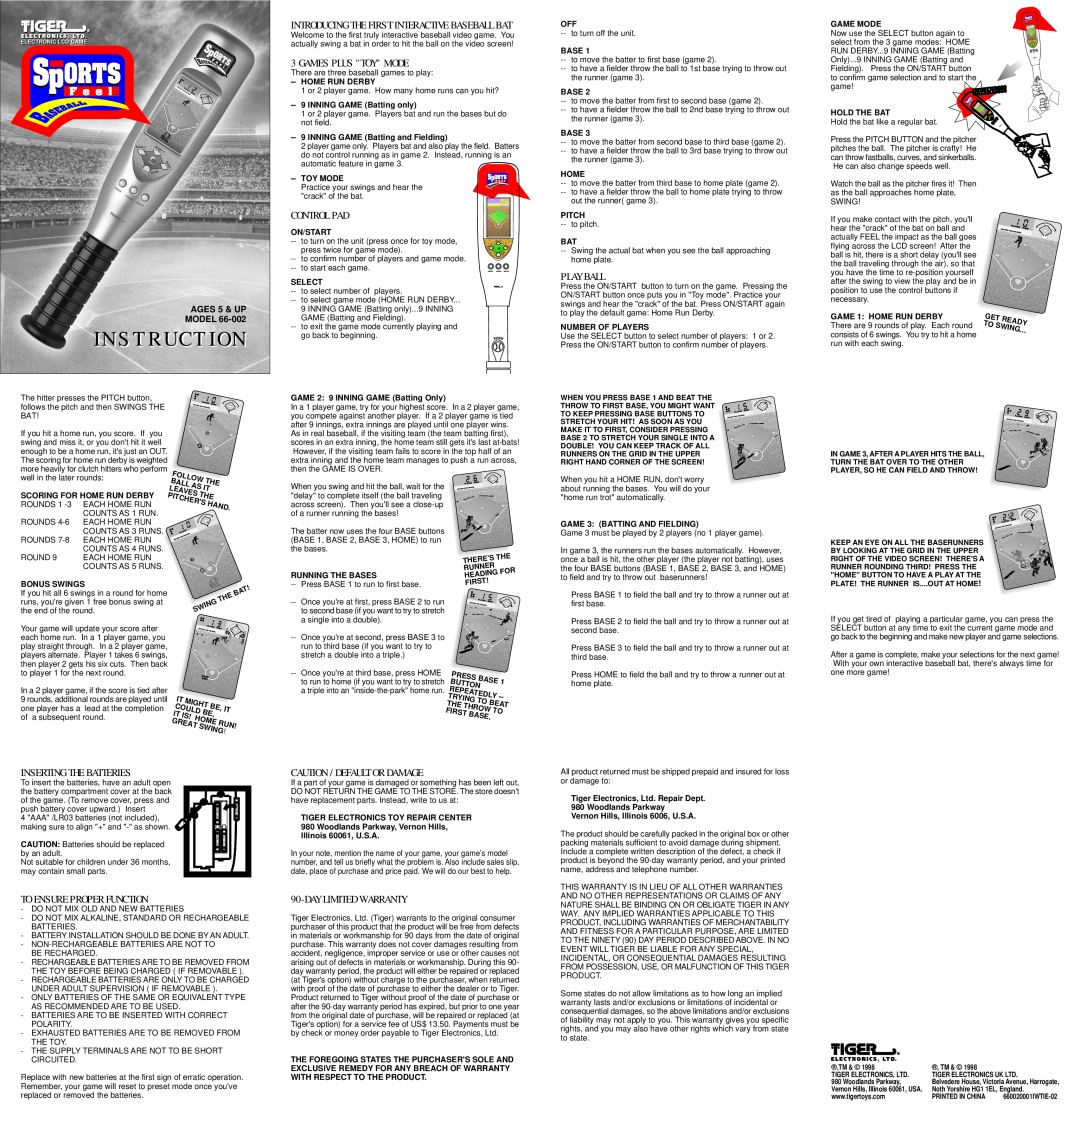 Hasbro 66-002 warranty Instruction, Introducing The First Interactive Baseball Bat, Games Plus Toy Mode, Control Pad, Hand 